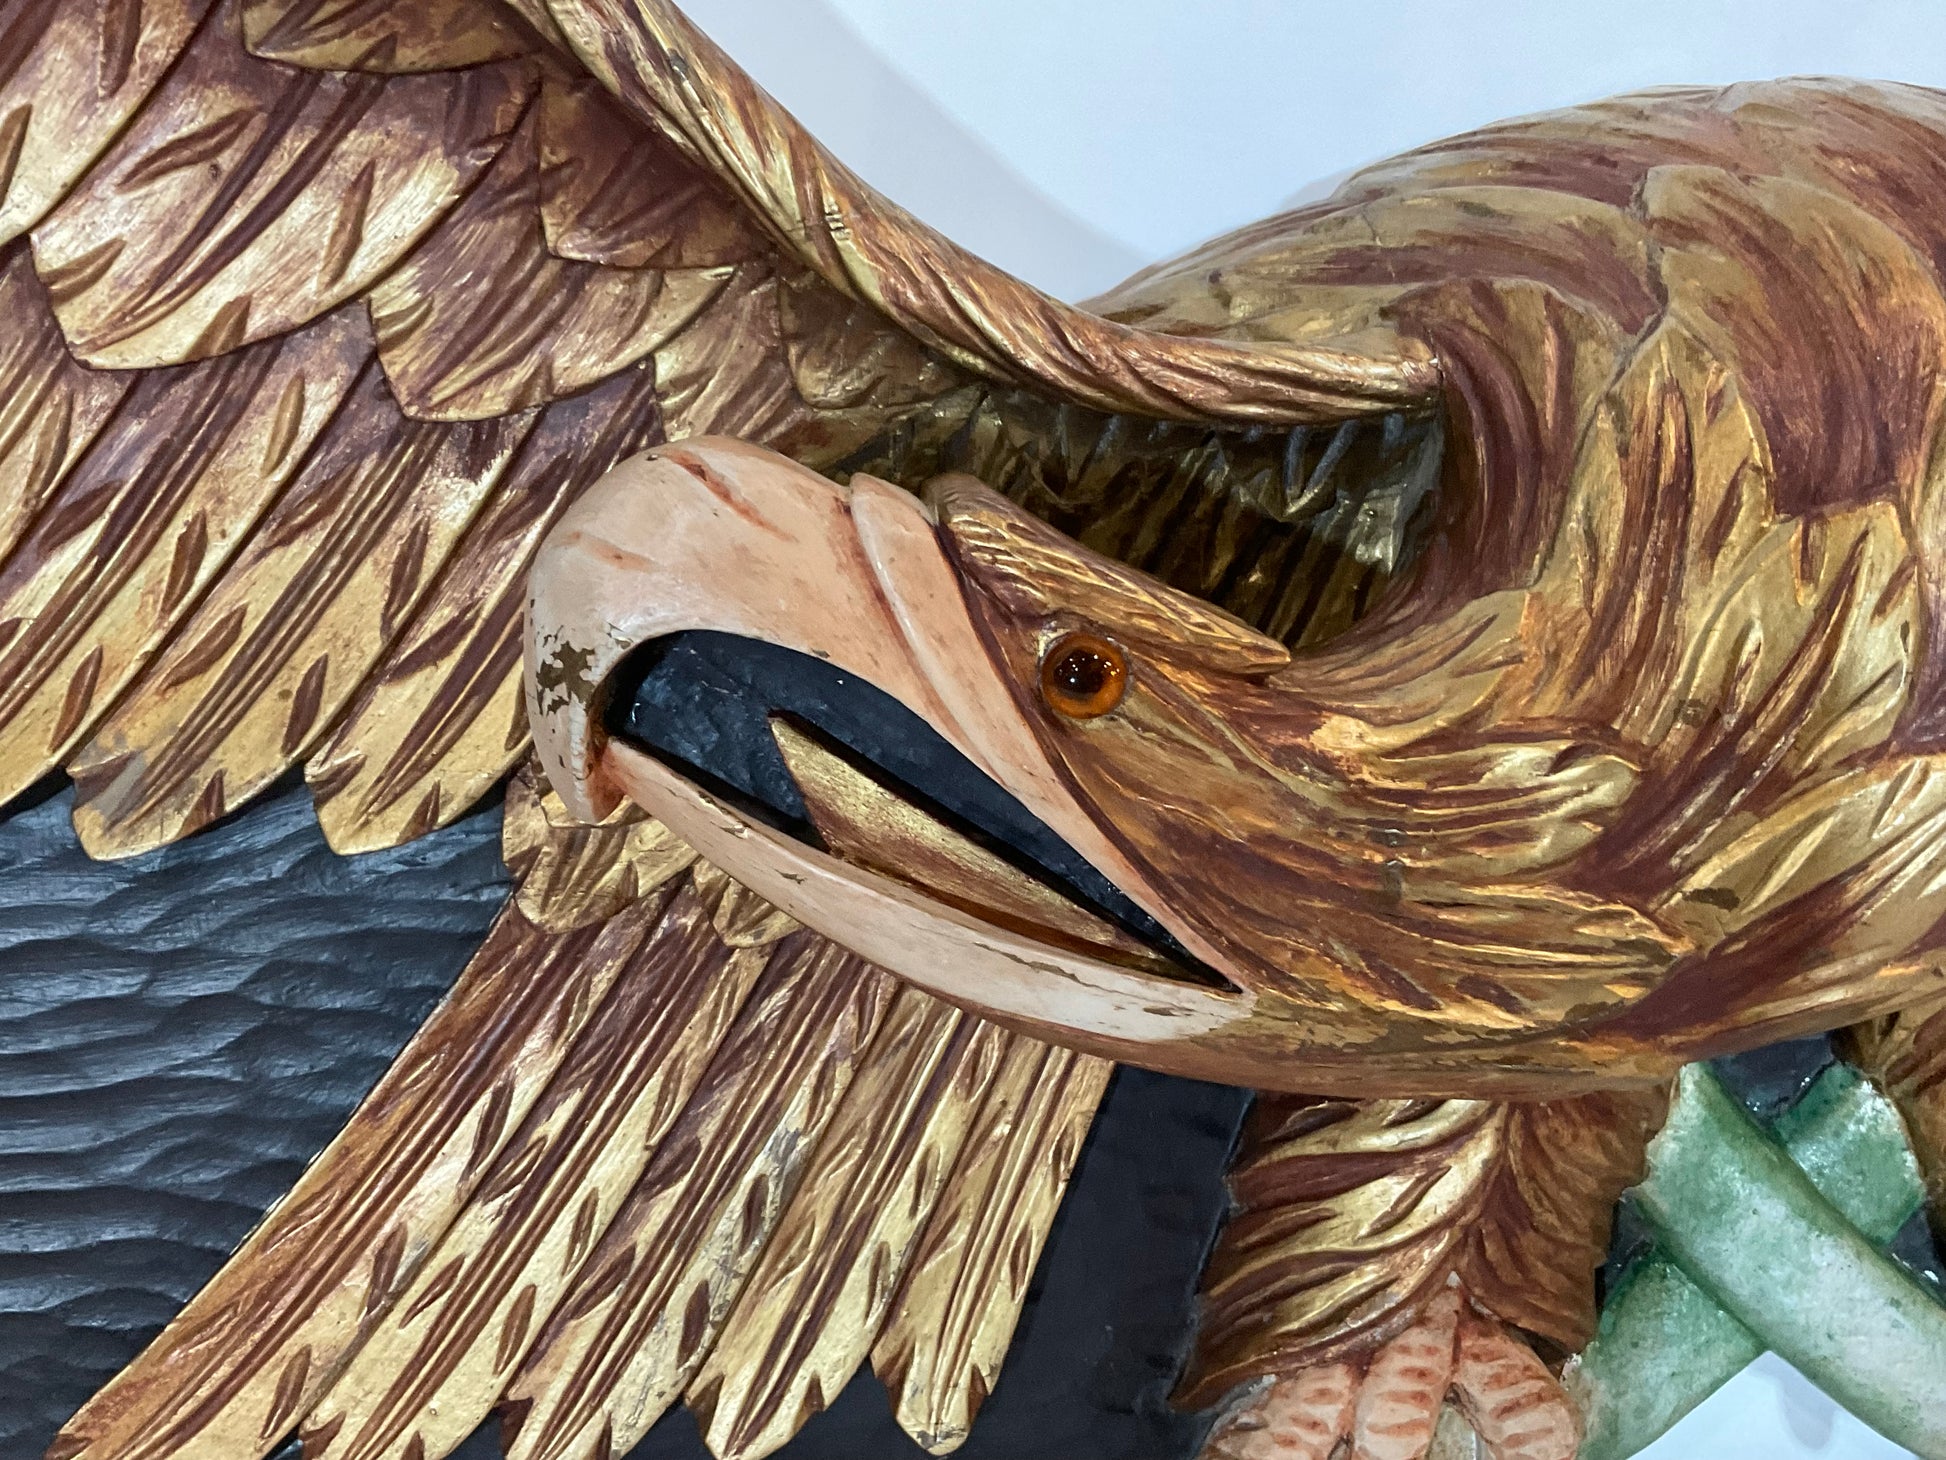 Carved Eagle by Simmons of Rockland Maine - Lannan Gallery